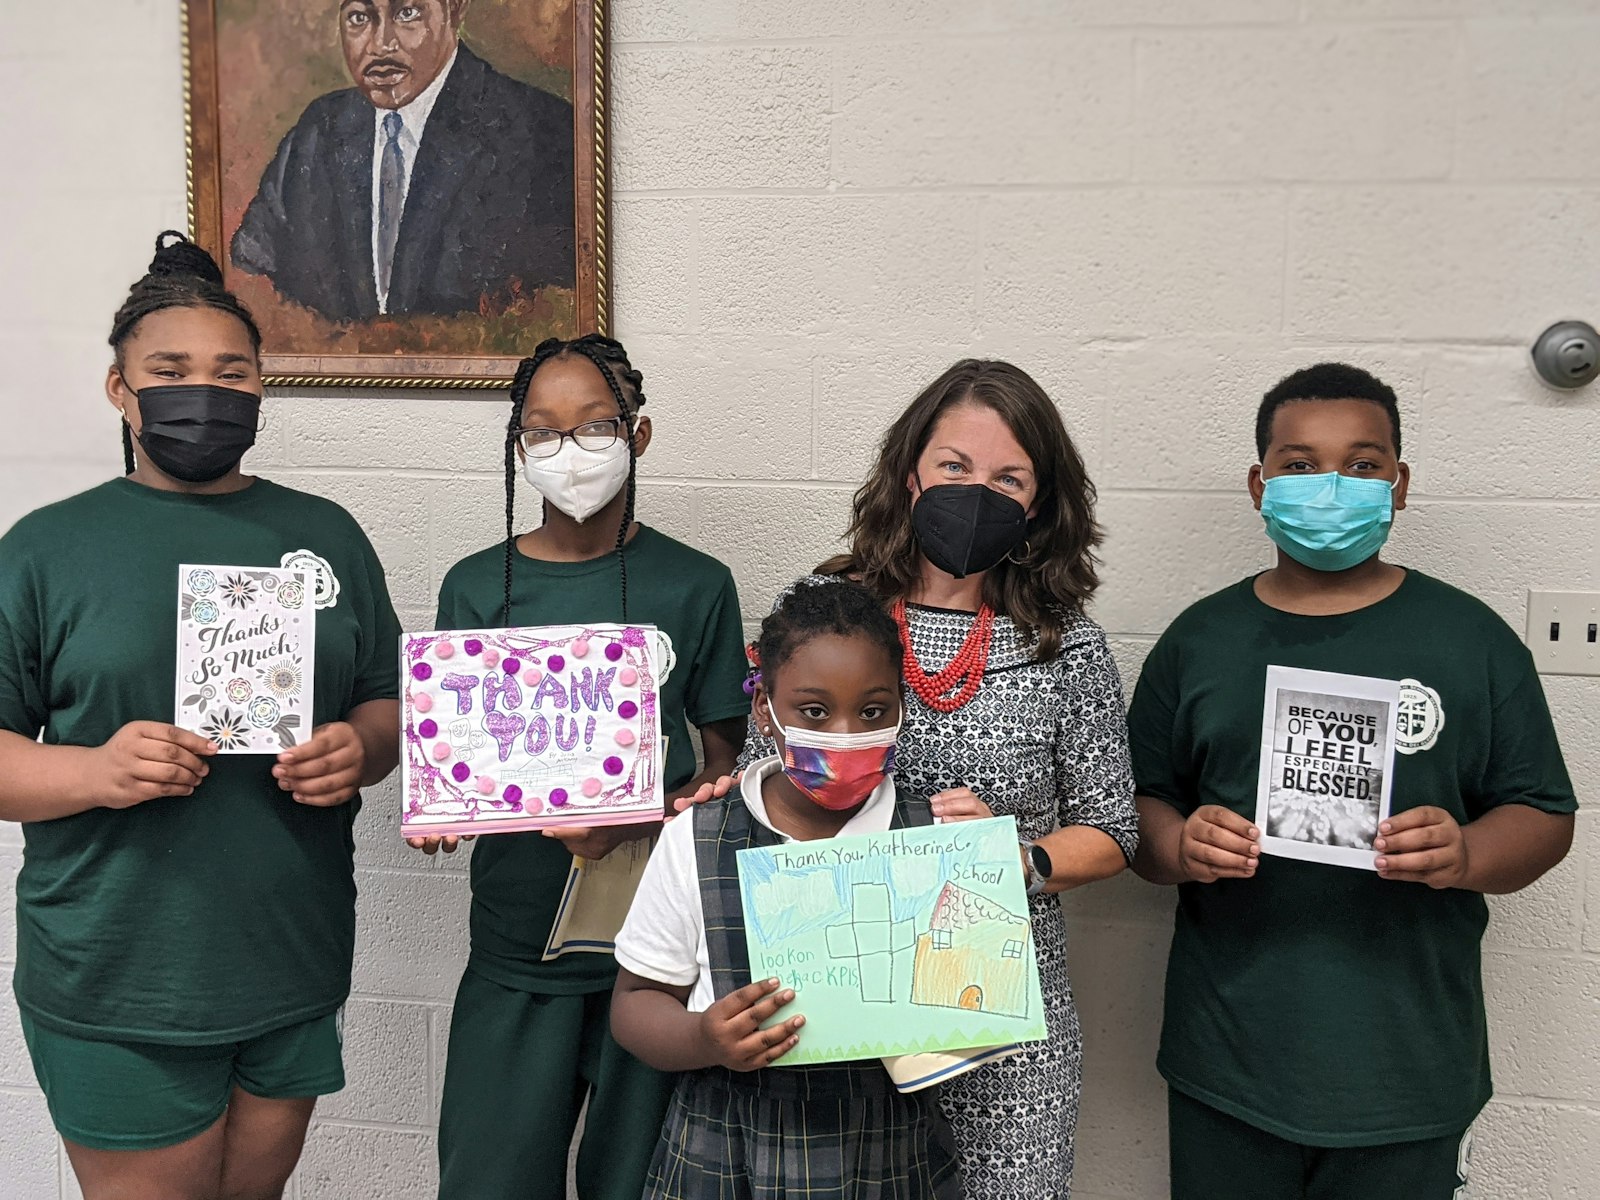 Students at Gesu School in northwest Detroit made thank-you cards in gratitude for their scholarships. For many families, the scholarships are the only way to afford tuition.